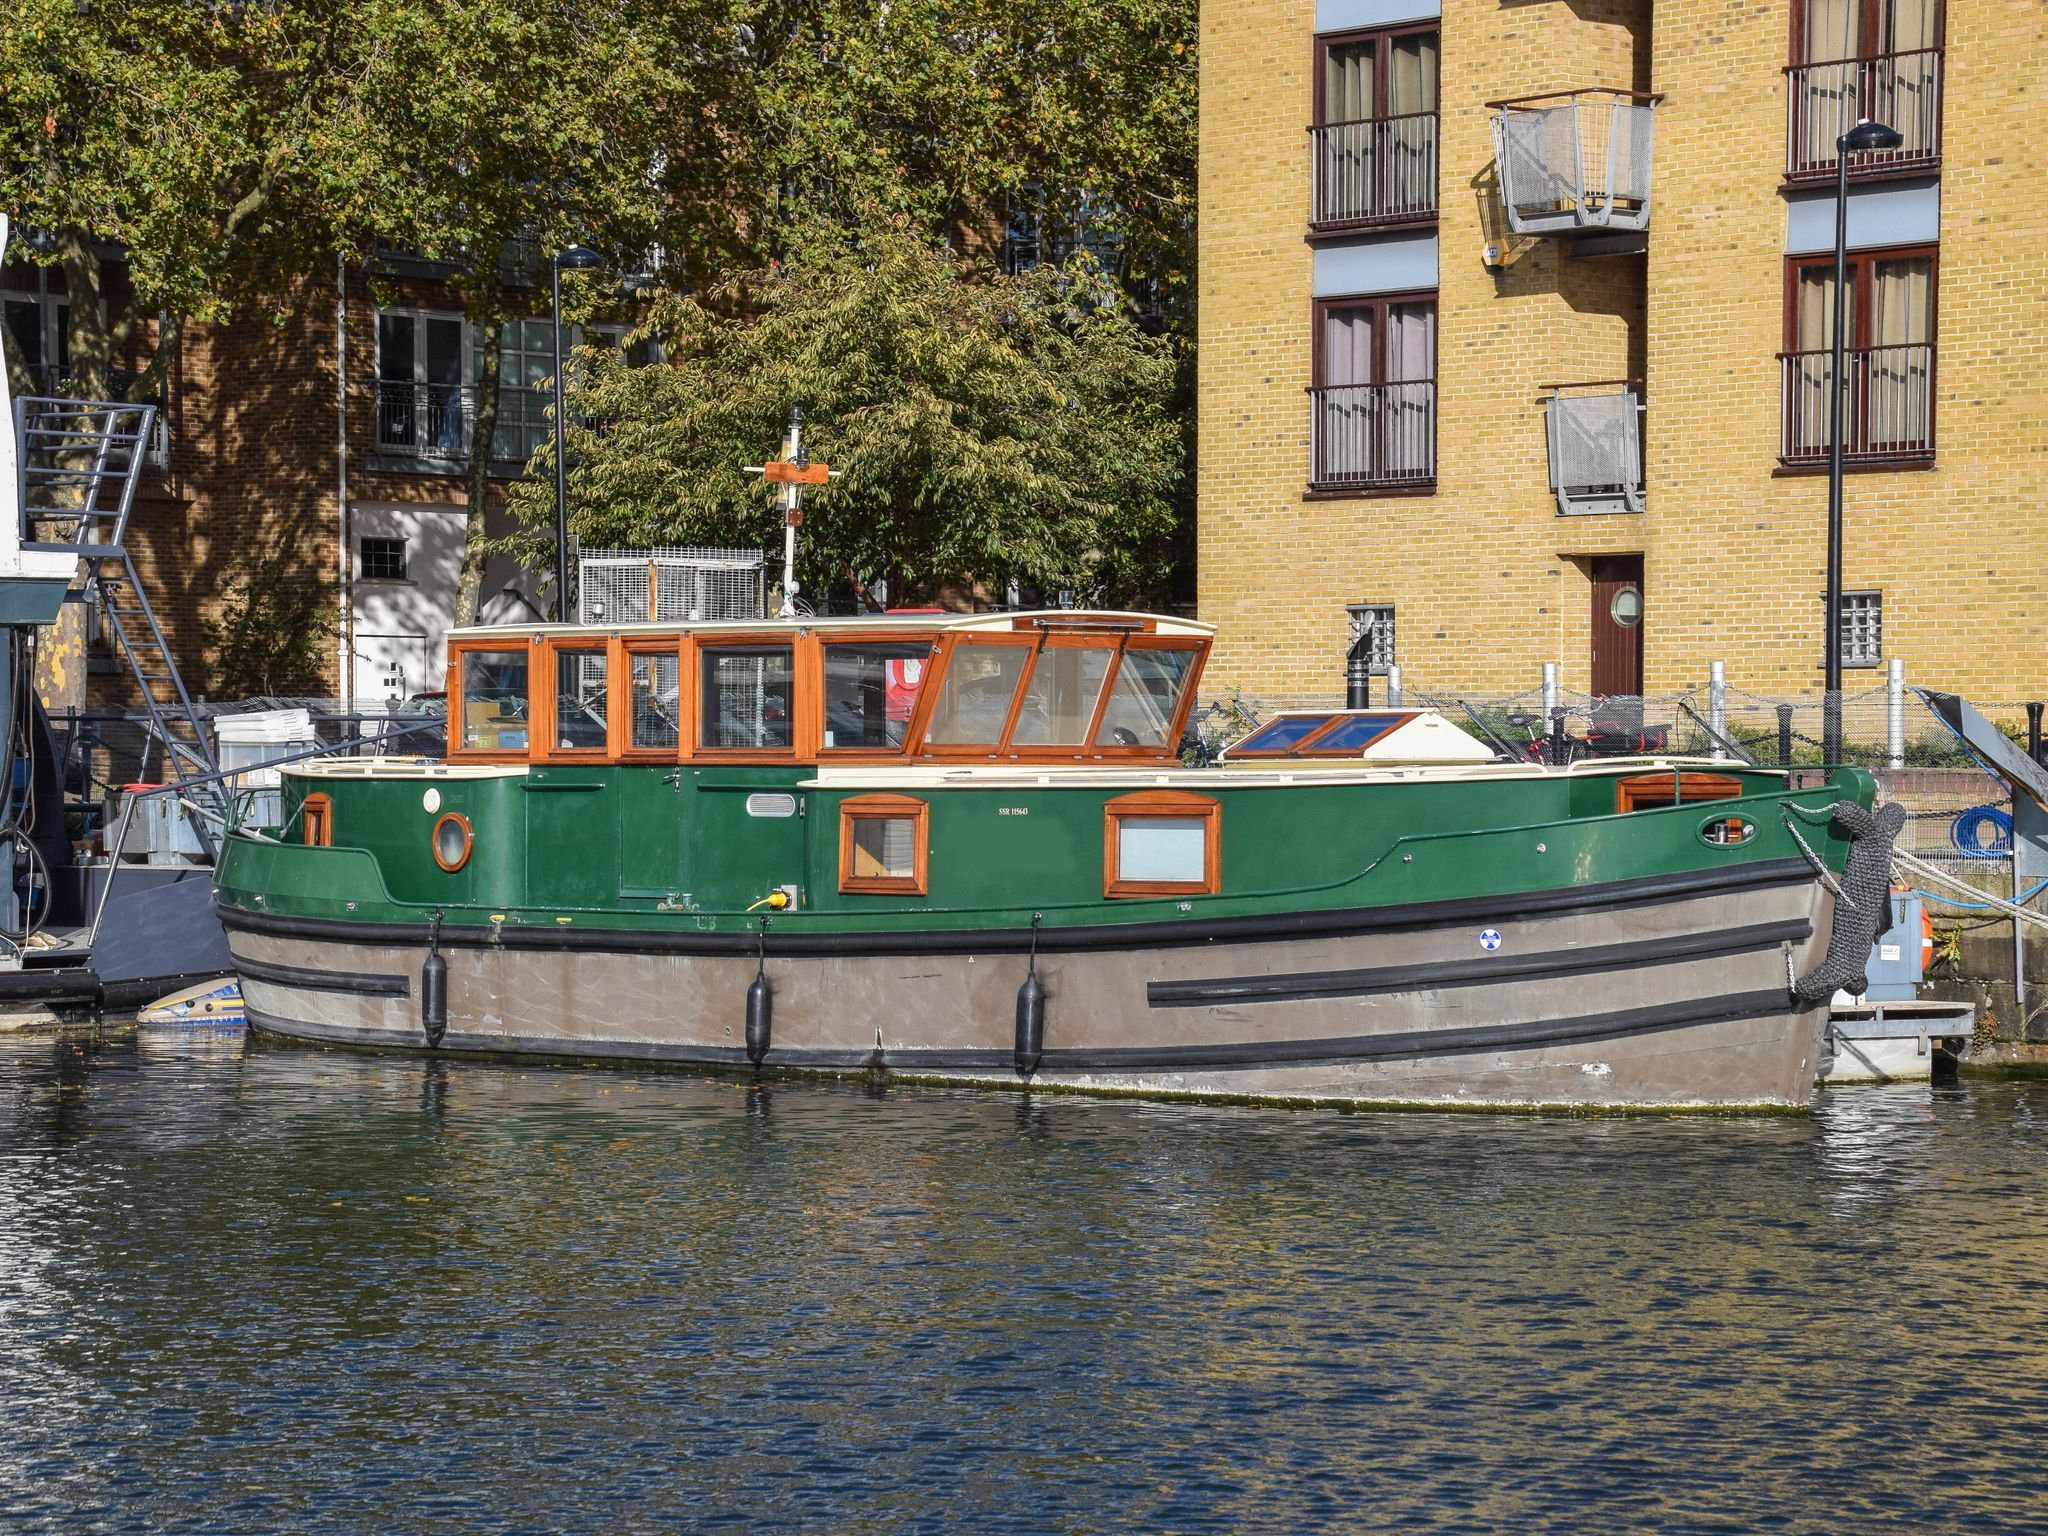 For sale only narrowboats uk Narrowboats for